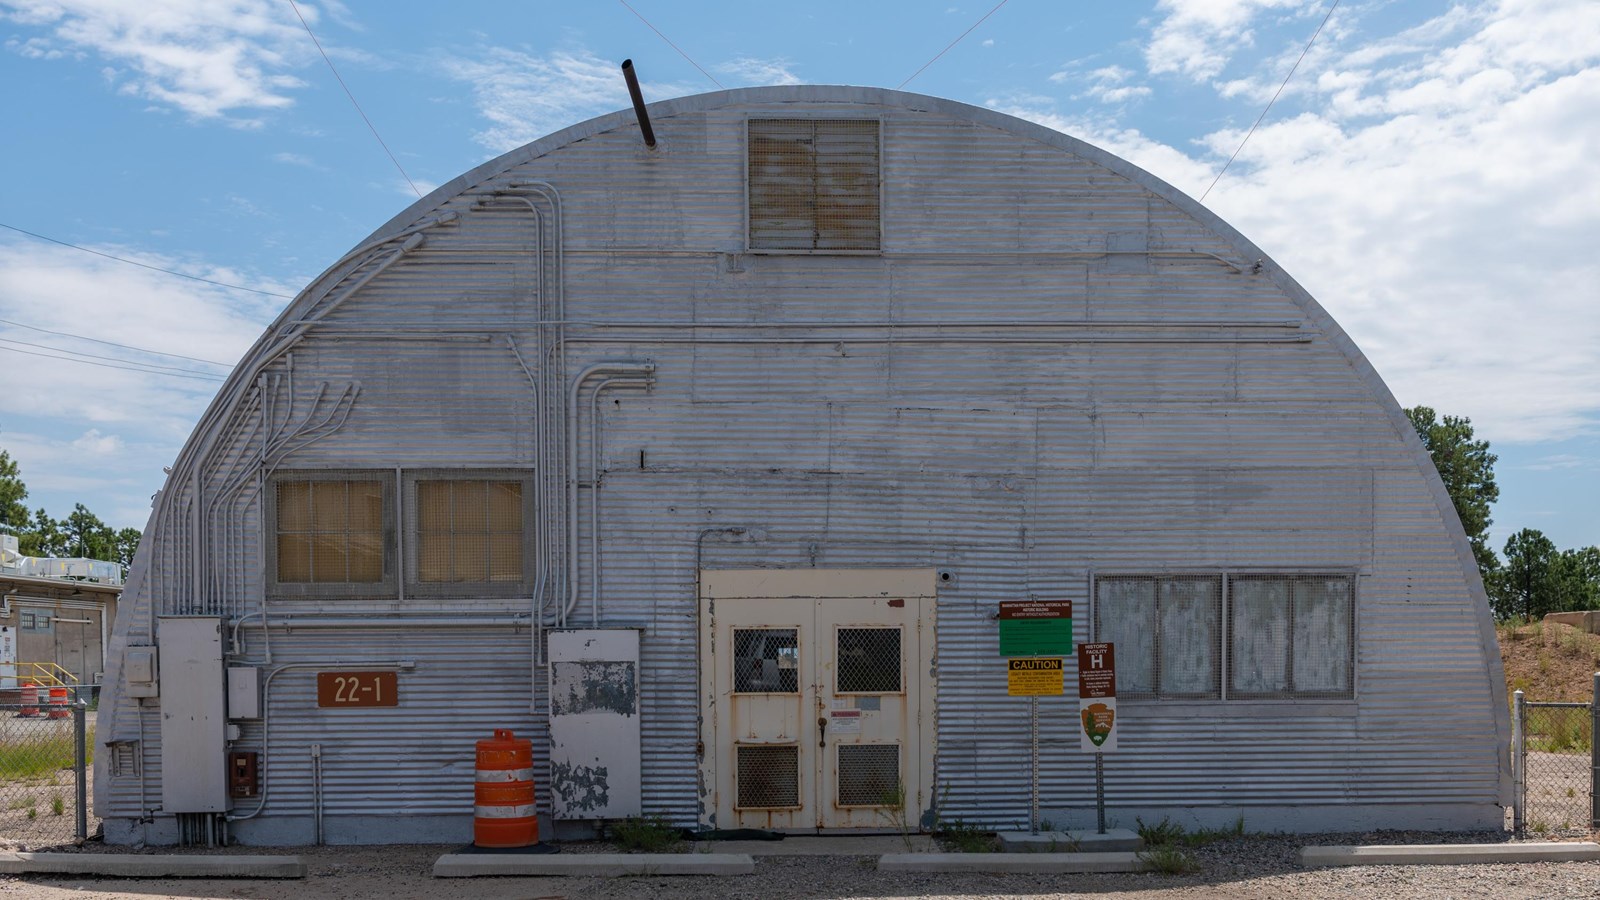 The semi-circular end of a large metal building with doors and windows.